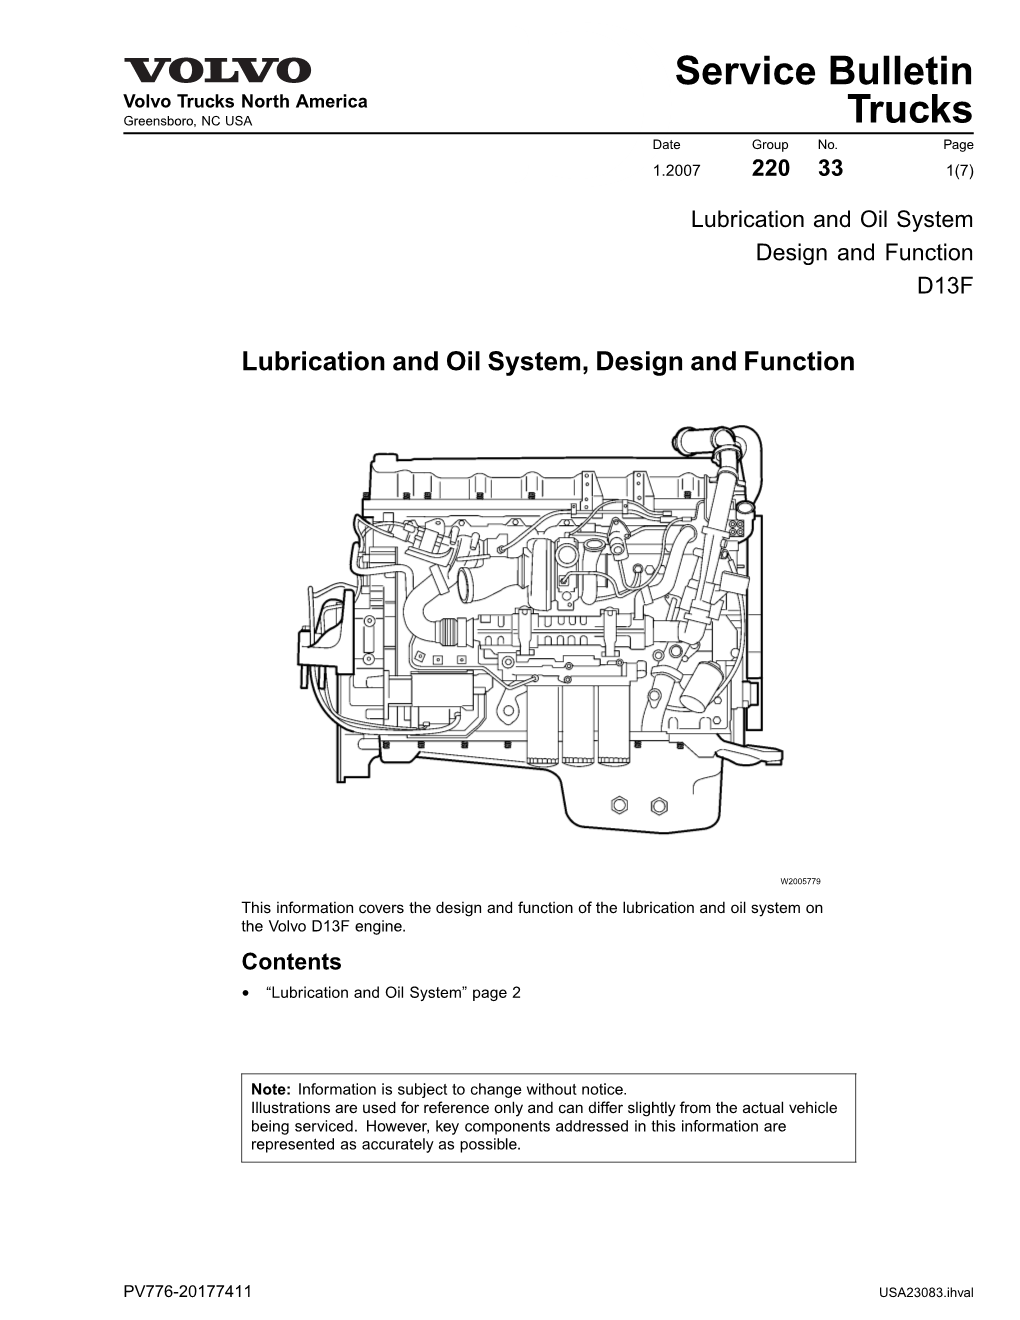 Lubrication and Oil System Design and Function D13F